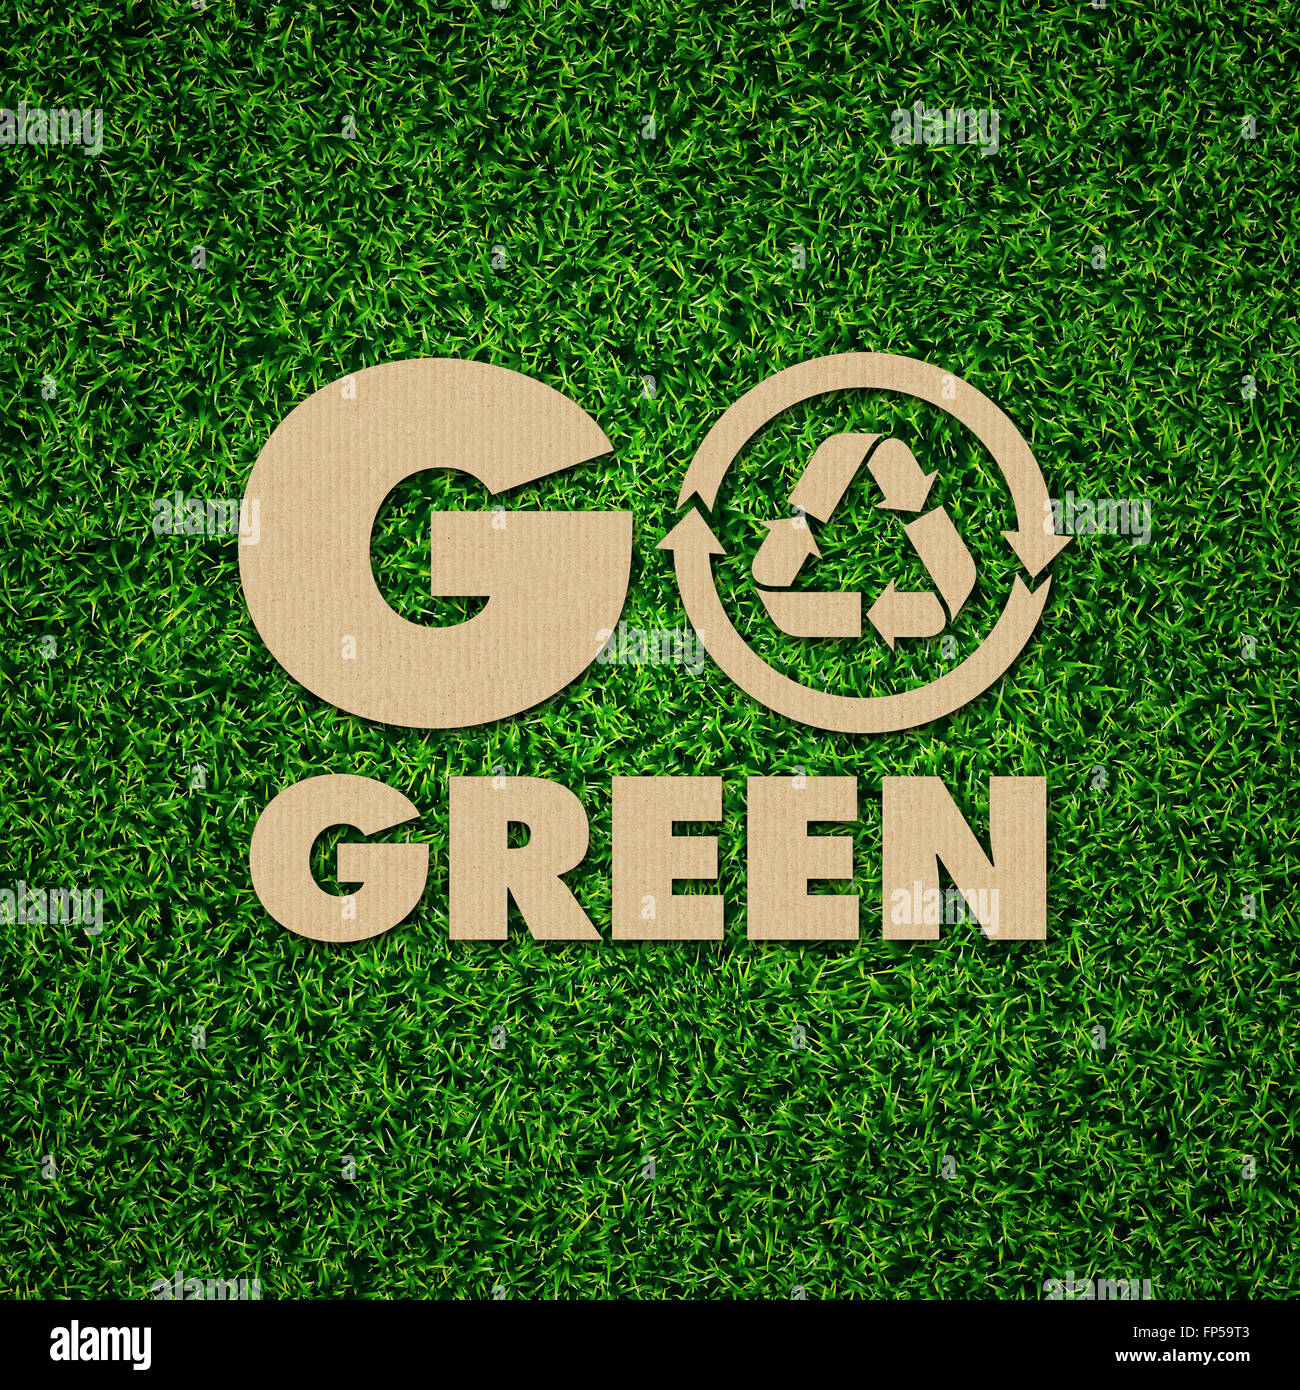 Renewable, sustainable, recycle, and green energy iconic concept on green grass. Stock Photo